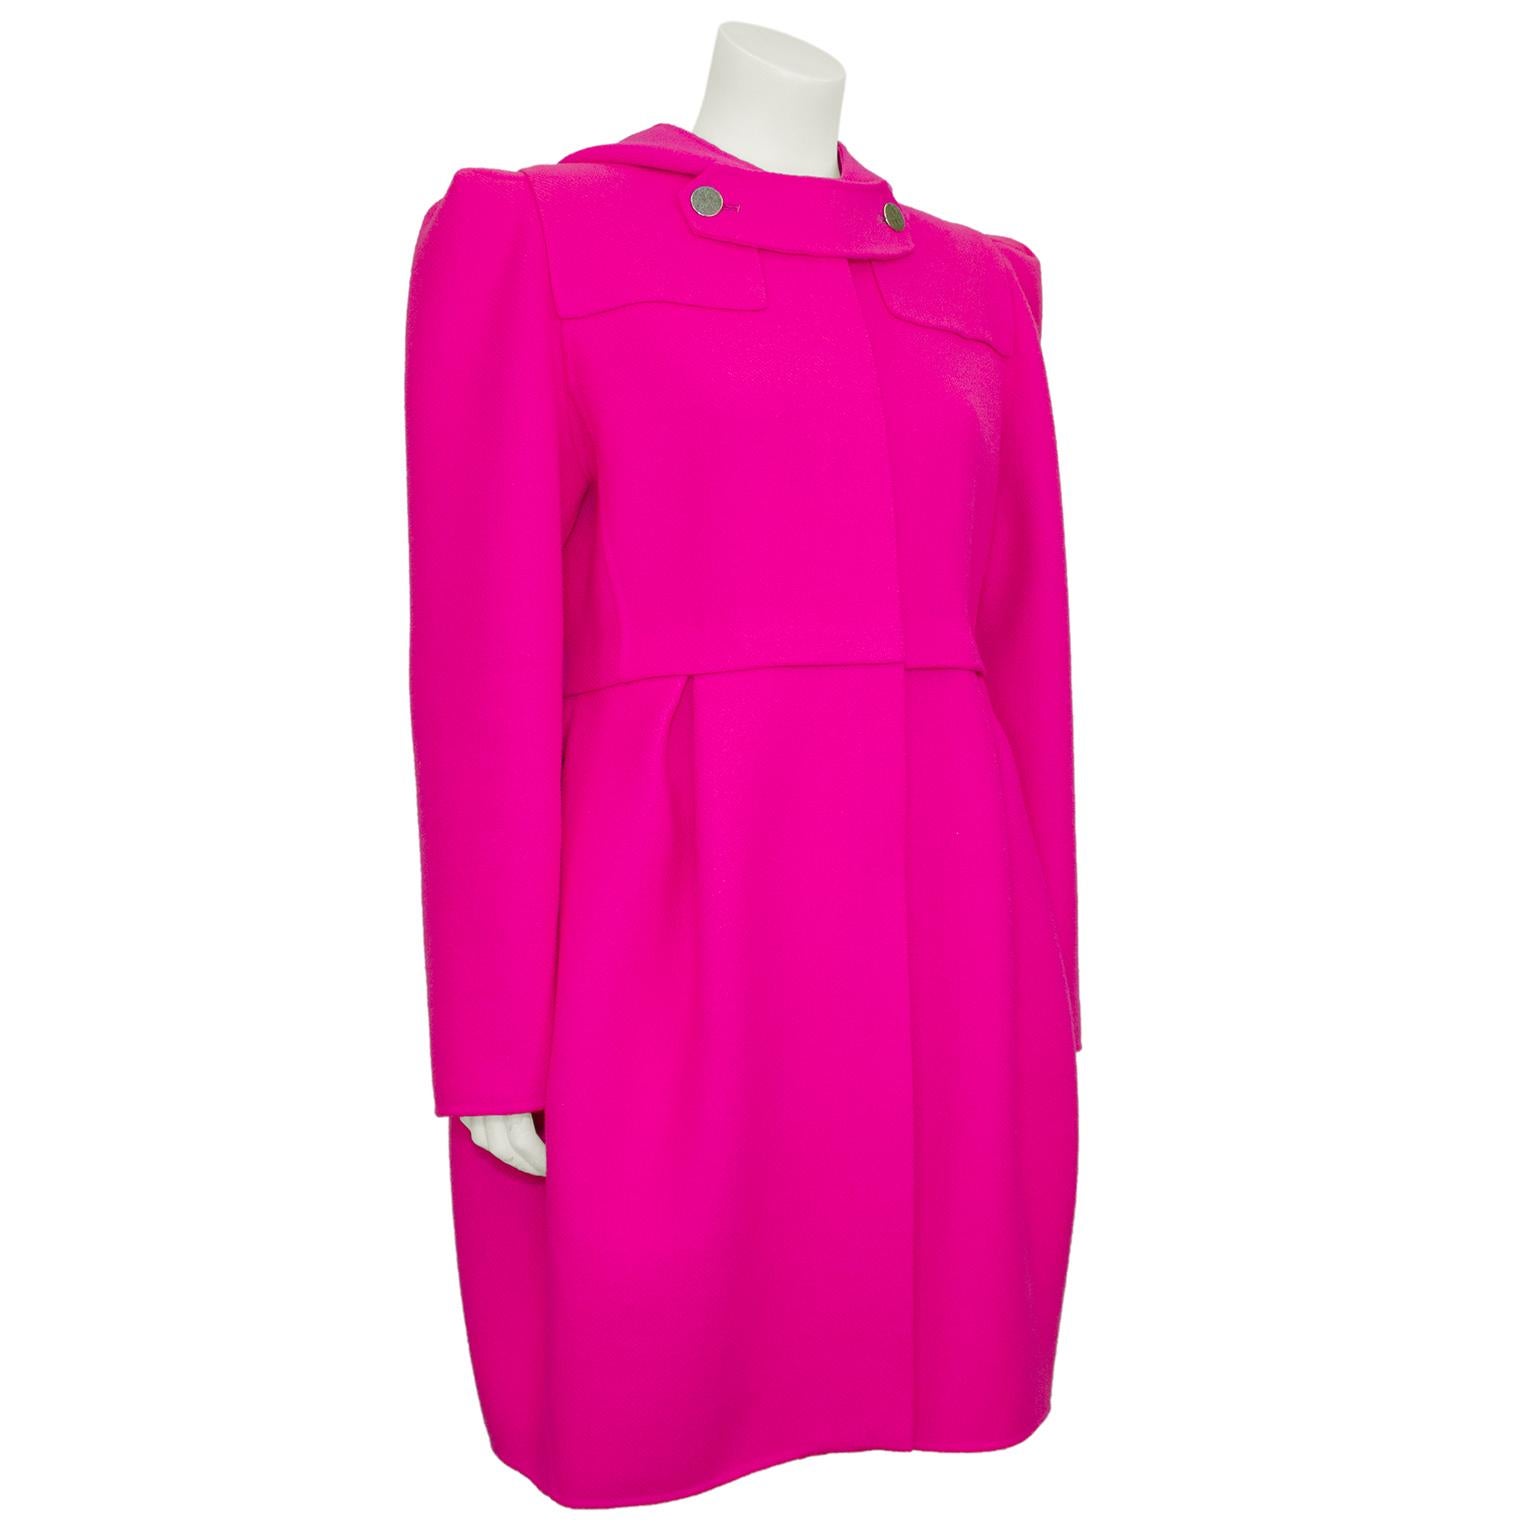 Stunning bright fuchsia Marc Jacobs felted wool coat from the fall 2009 runway collection. Features a handkerchief shaped hood and two round silver metal buttons at yoke. Heavy duty covered silver zipper up centre front. Slightly cinches at waist